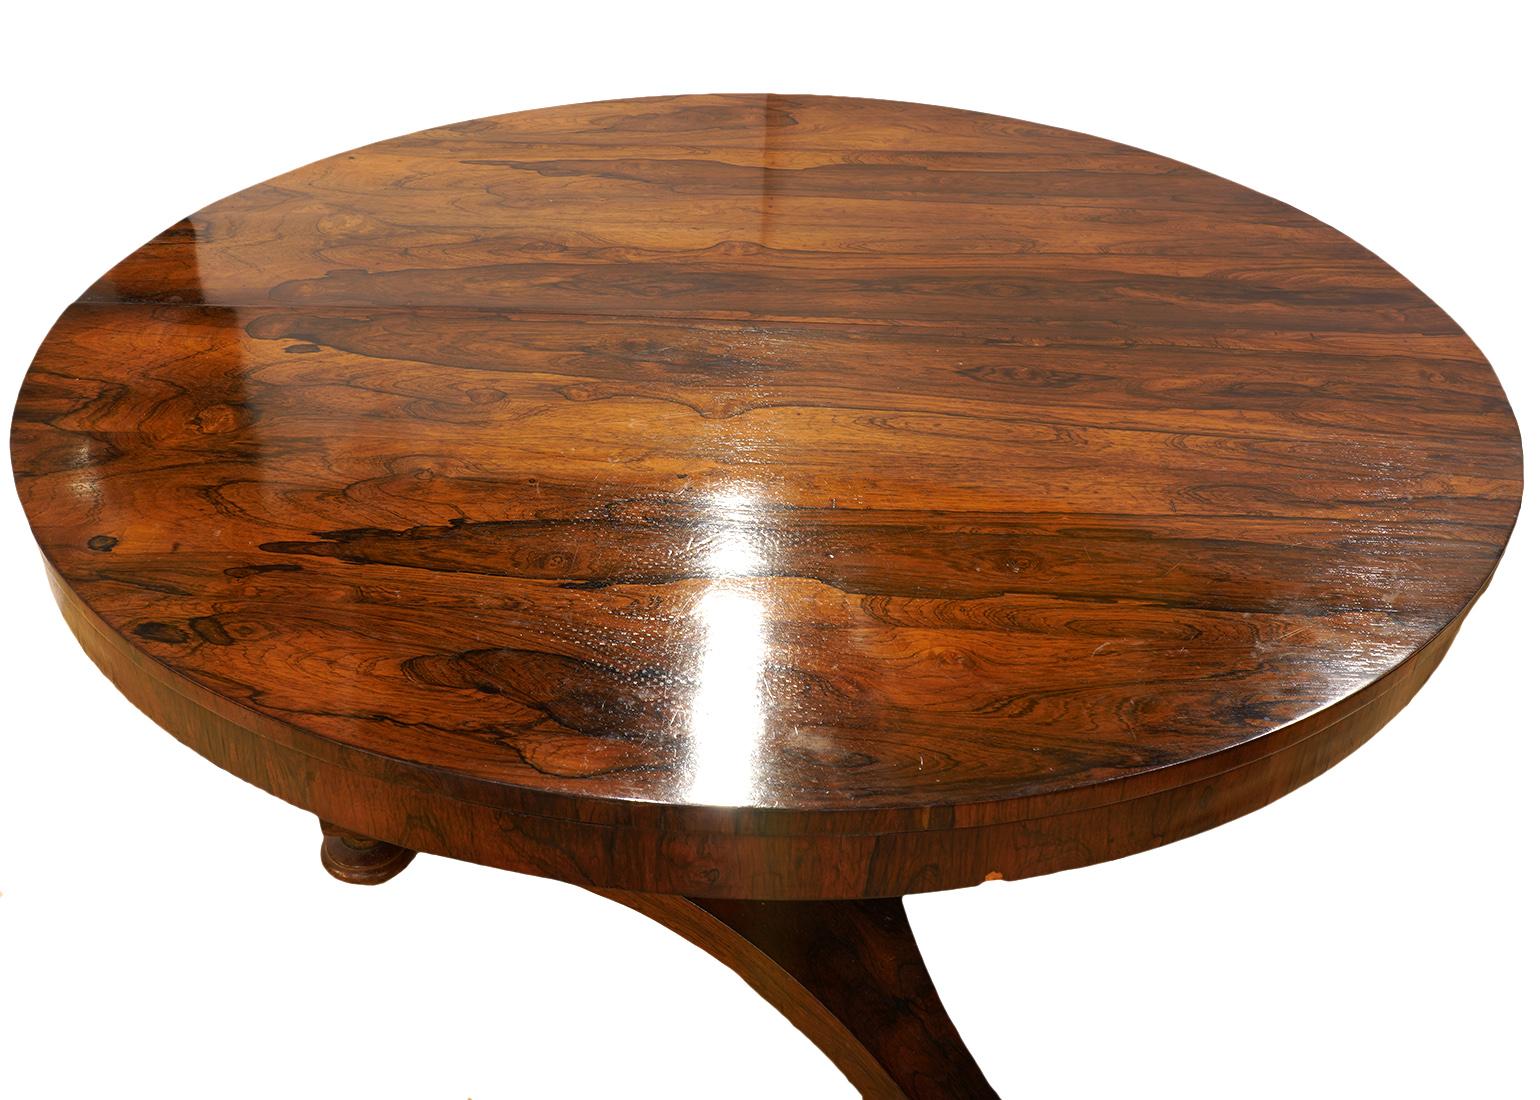 This good William IV rosewood pedestal center table or dining table features a round polished bookmatched figured top on a slightly tapering hexagonal pedestal on a triangular base resting on turned feet.